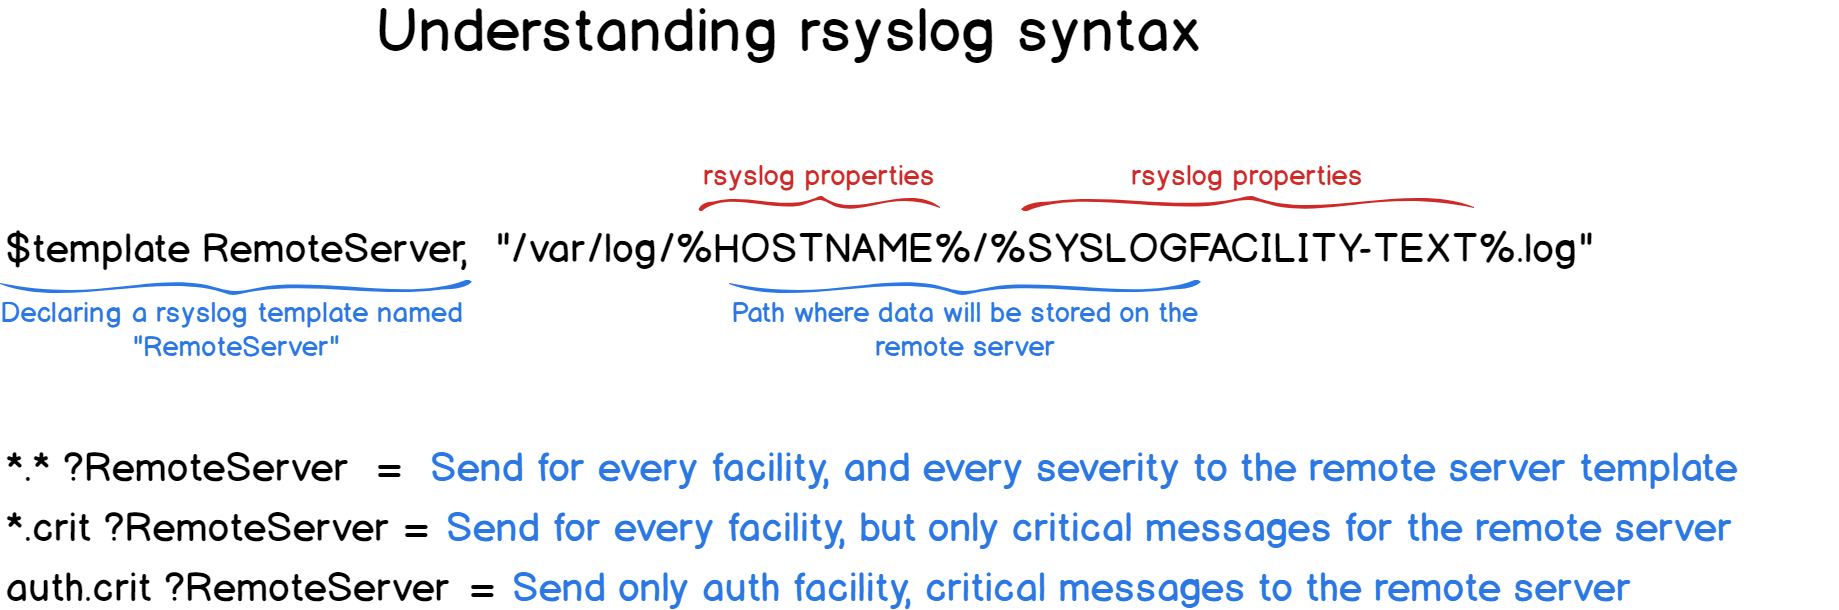 Details about rsyslog syntax